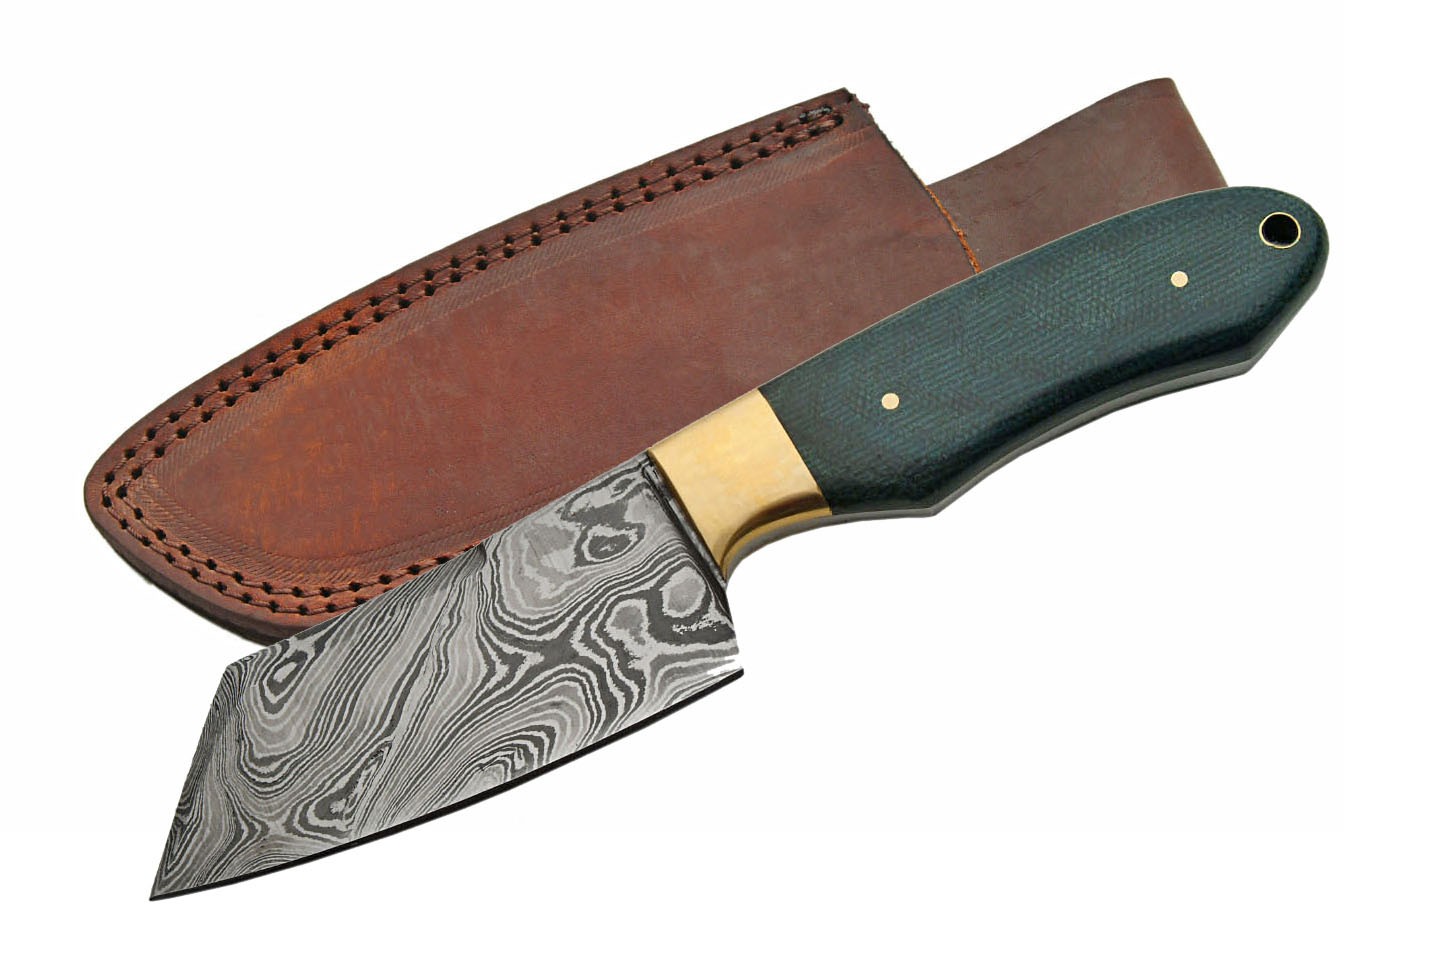 Damascus Steel Hunting Knife 8.5in. Overall Cleaver Blade + Leather Sheath